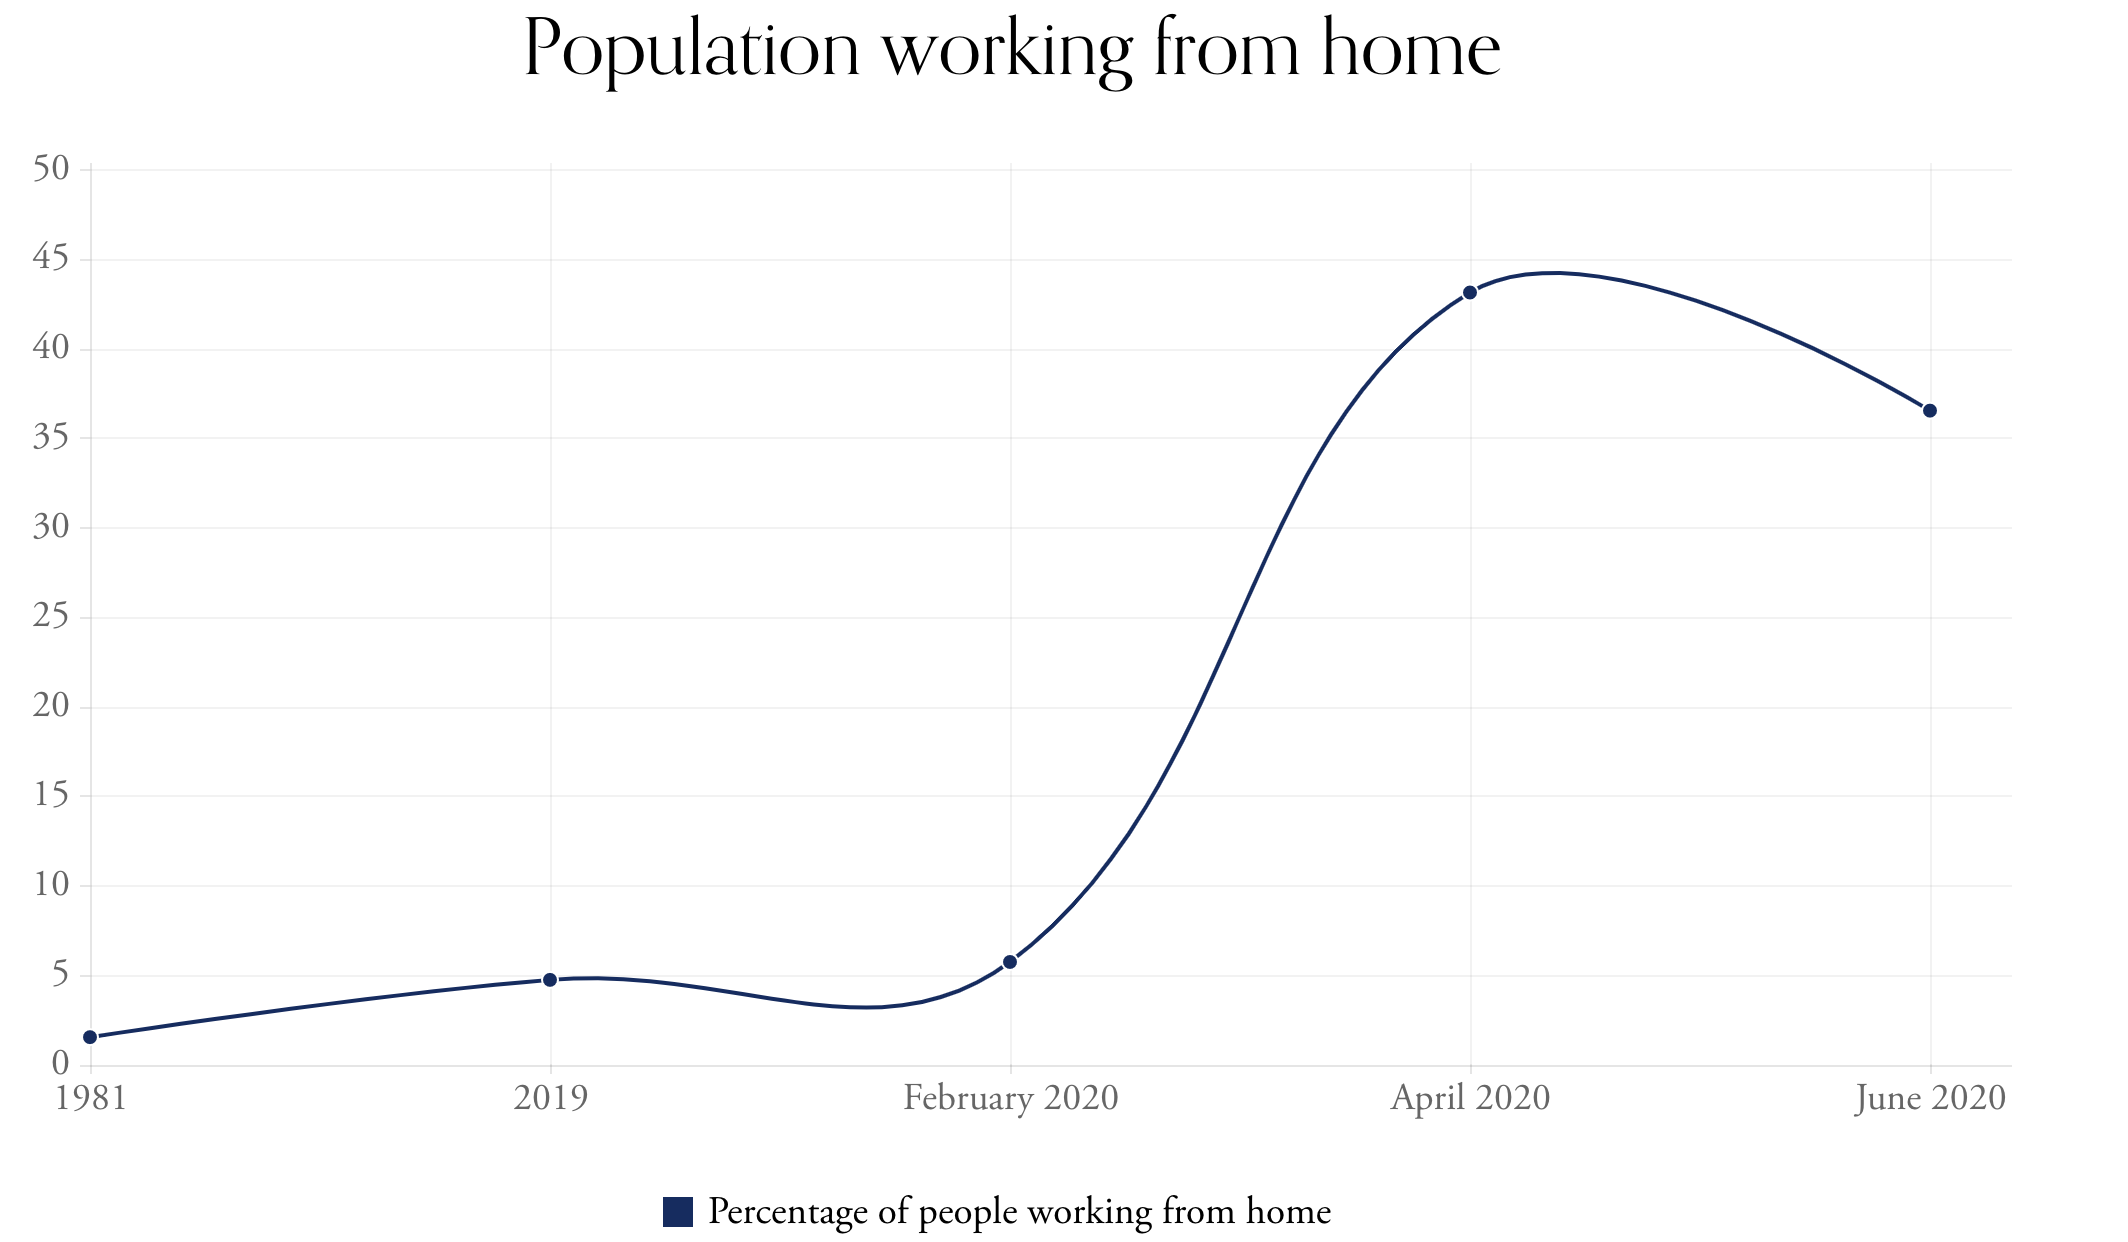 population-people-working-from-home-1981-2020.png